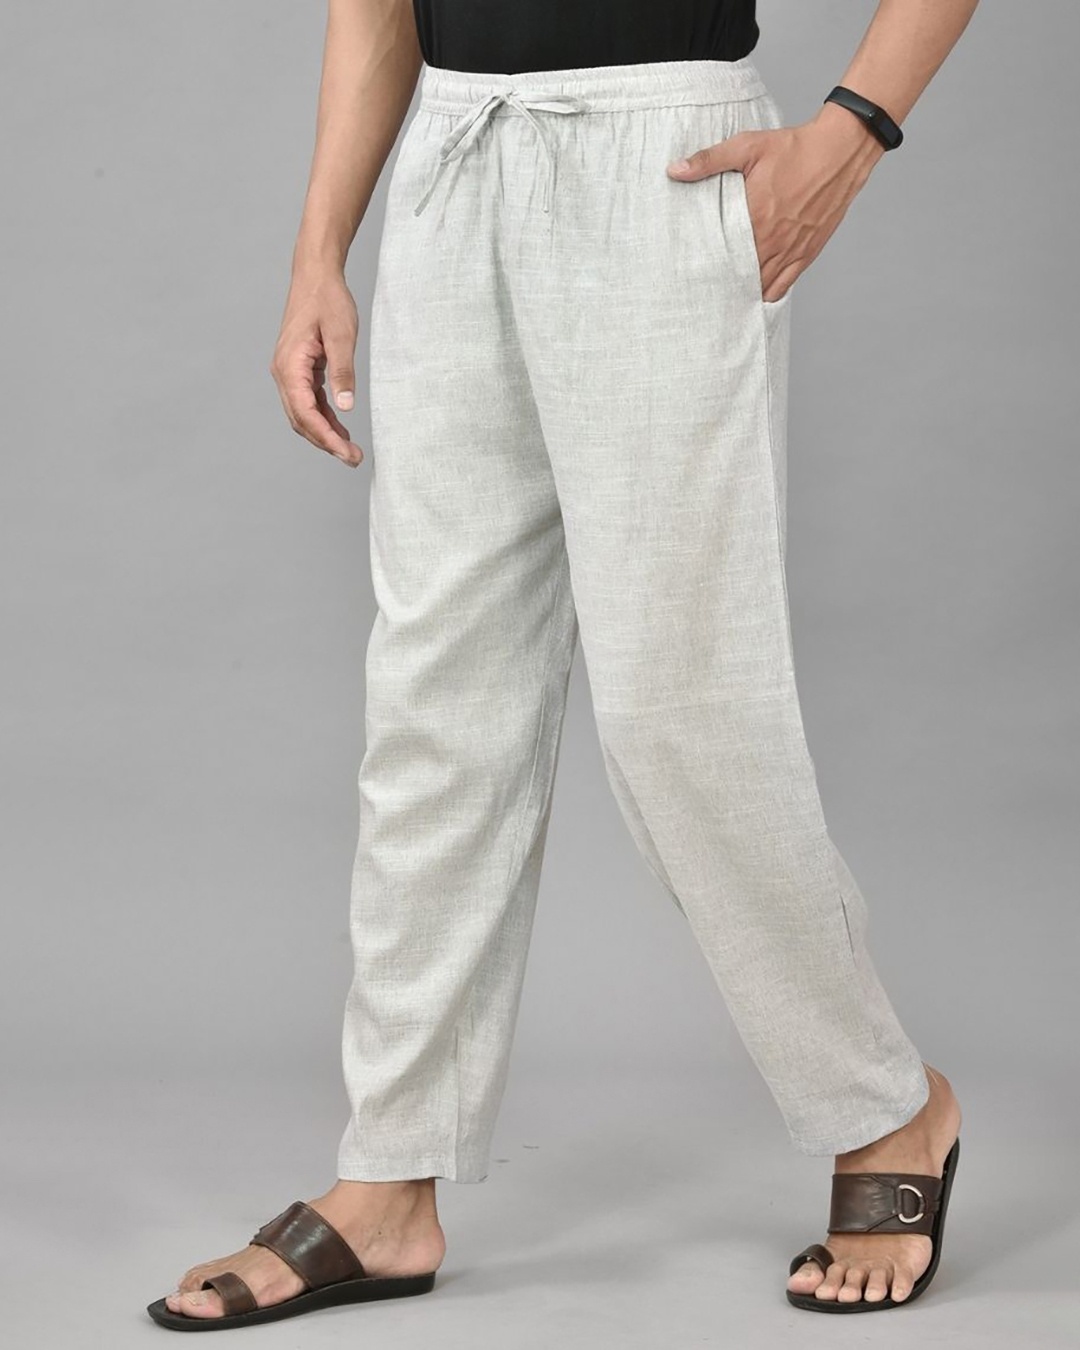 Top more than 89 best cotton trousers brand best - in.duhocakina